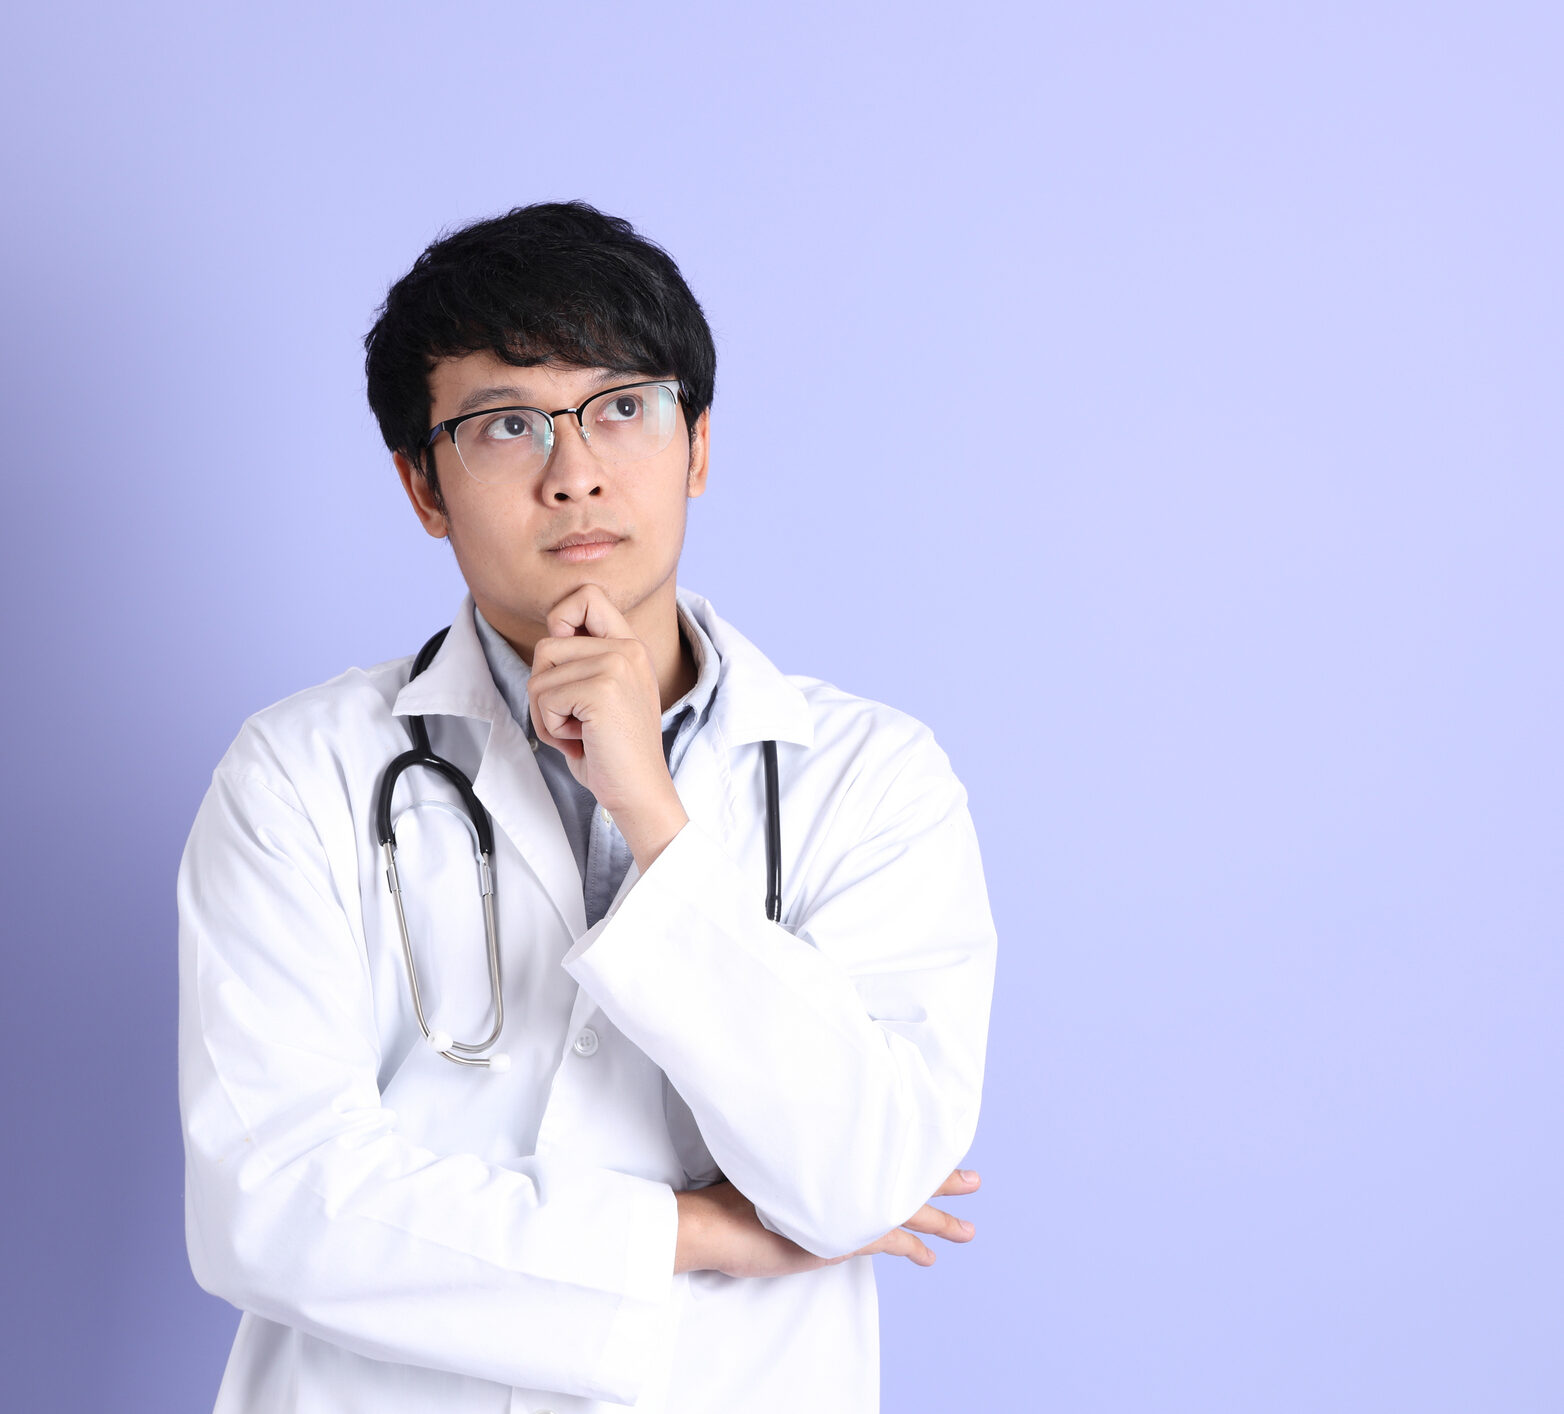 The young adult Asian physician standing on the purple background. Bringing time in range into practice